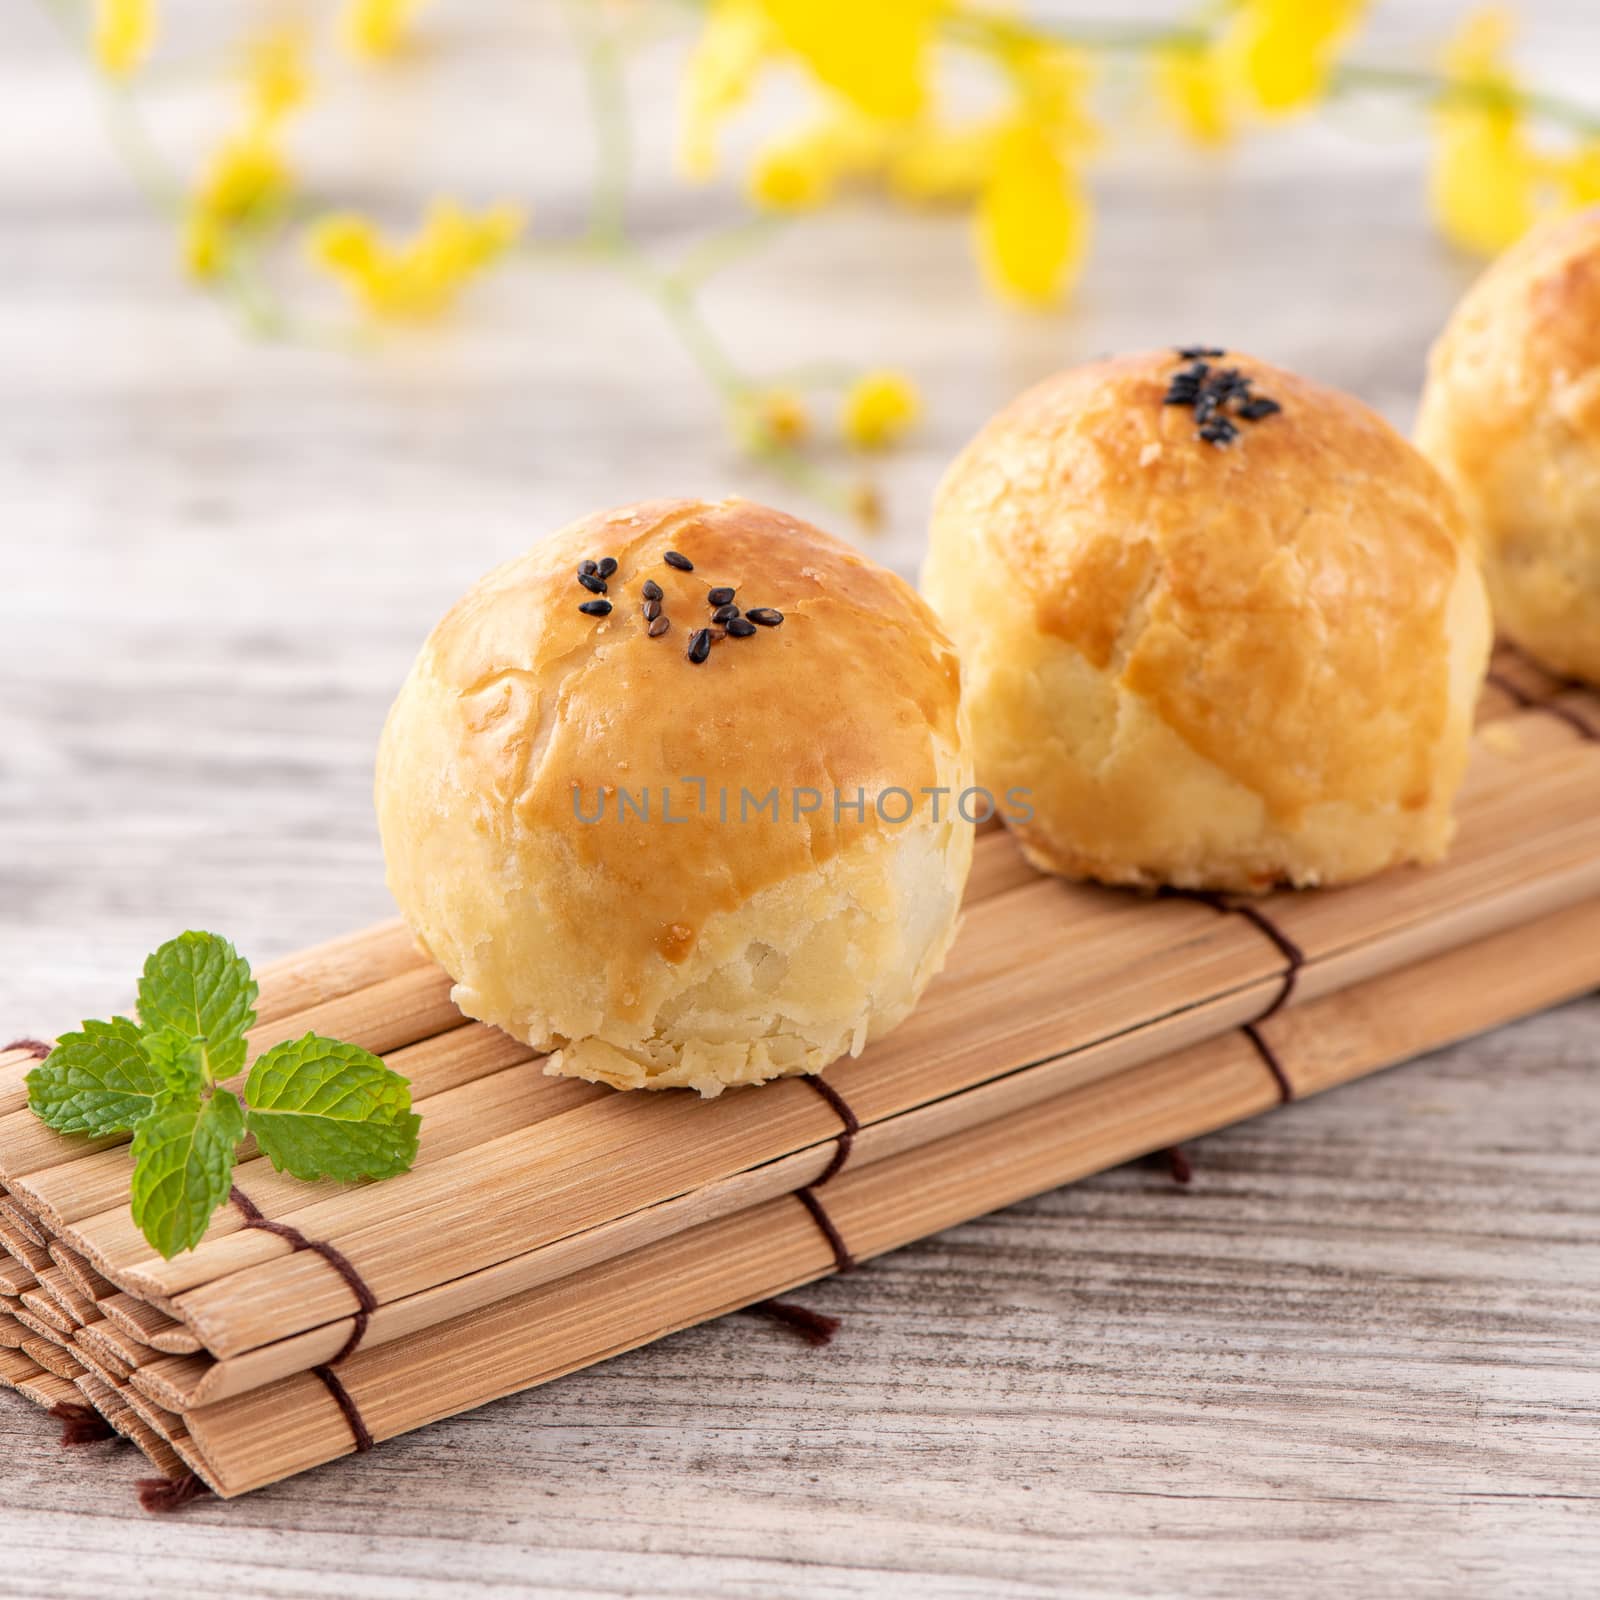 Moon cake yolk pastry, mooncake for Mid-Autumn Festival holiday, top view design concept on bright wooden table with copy space